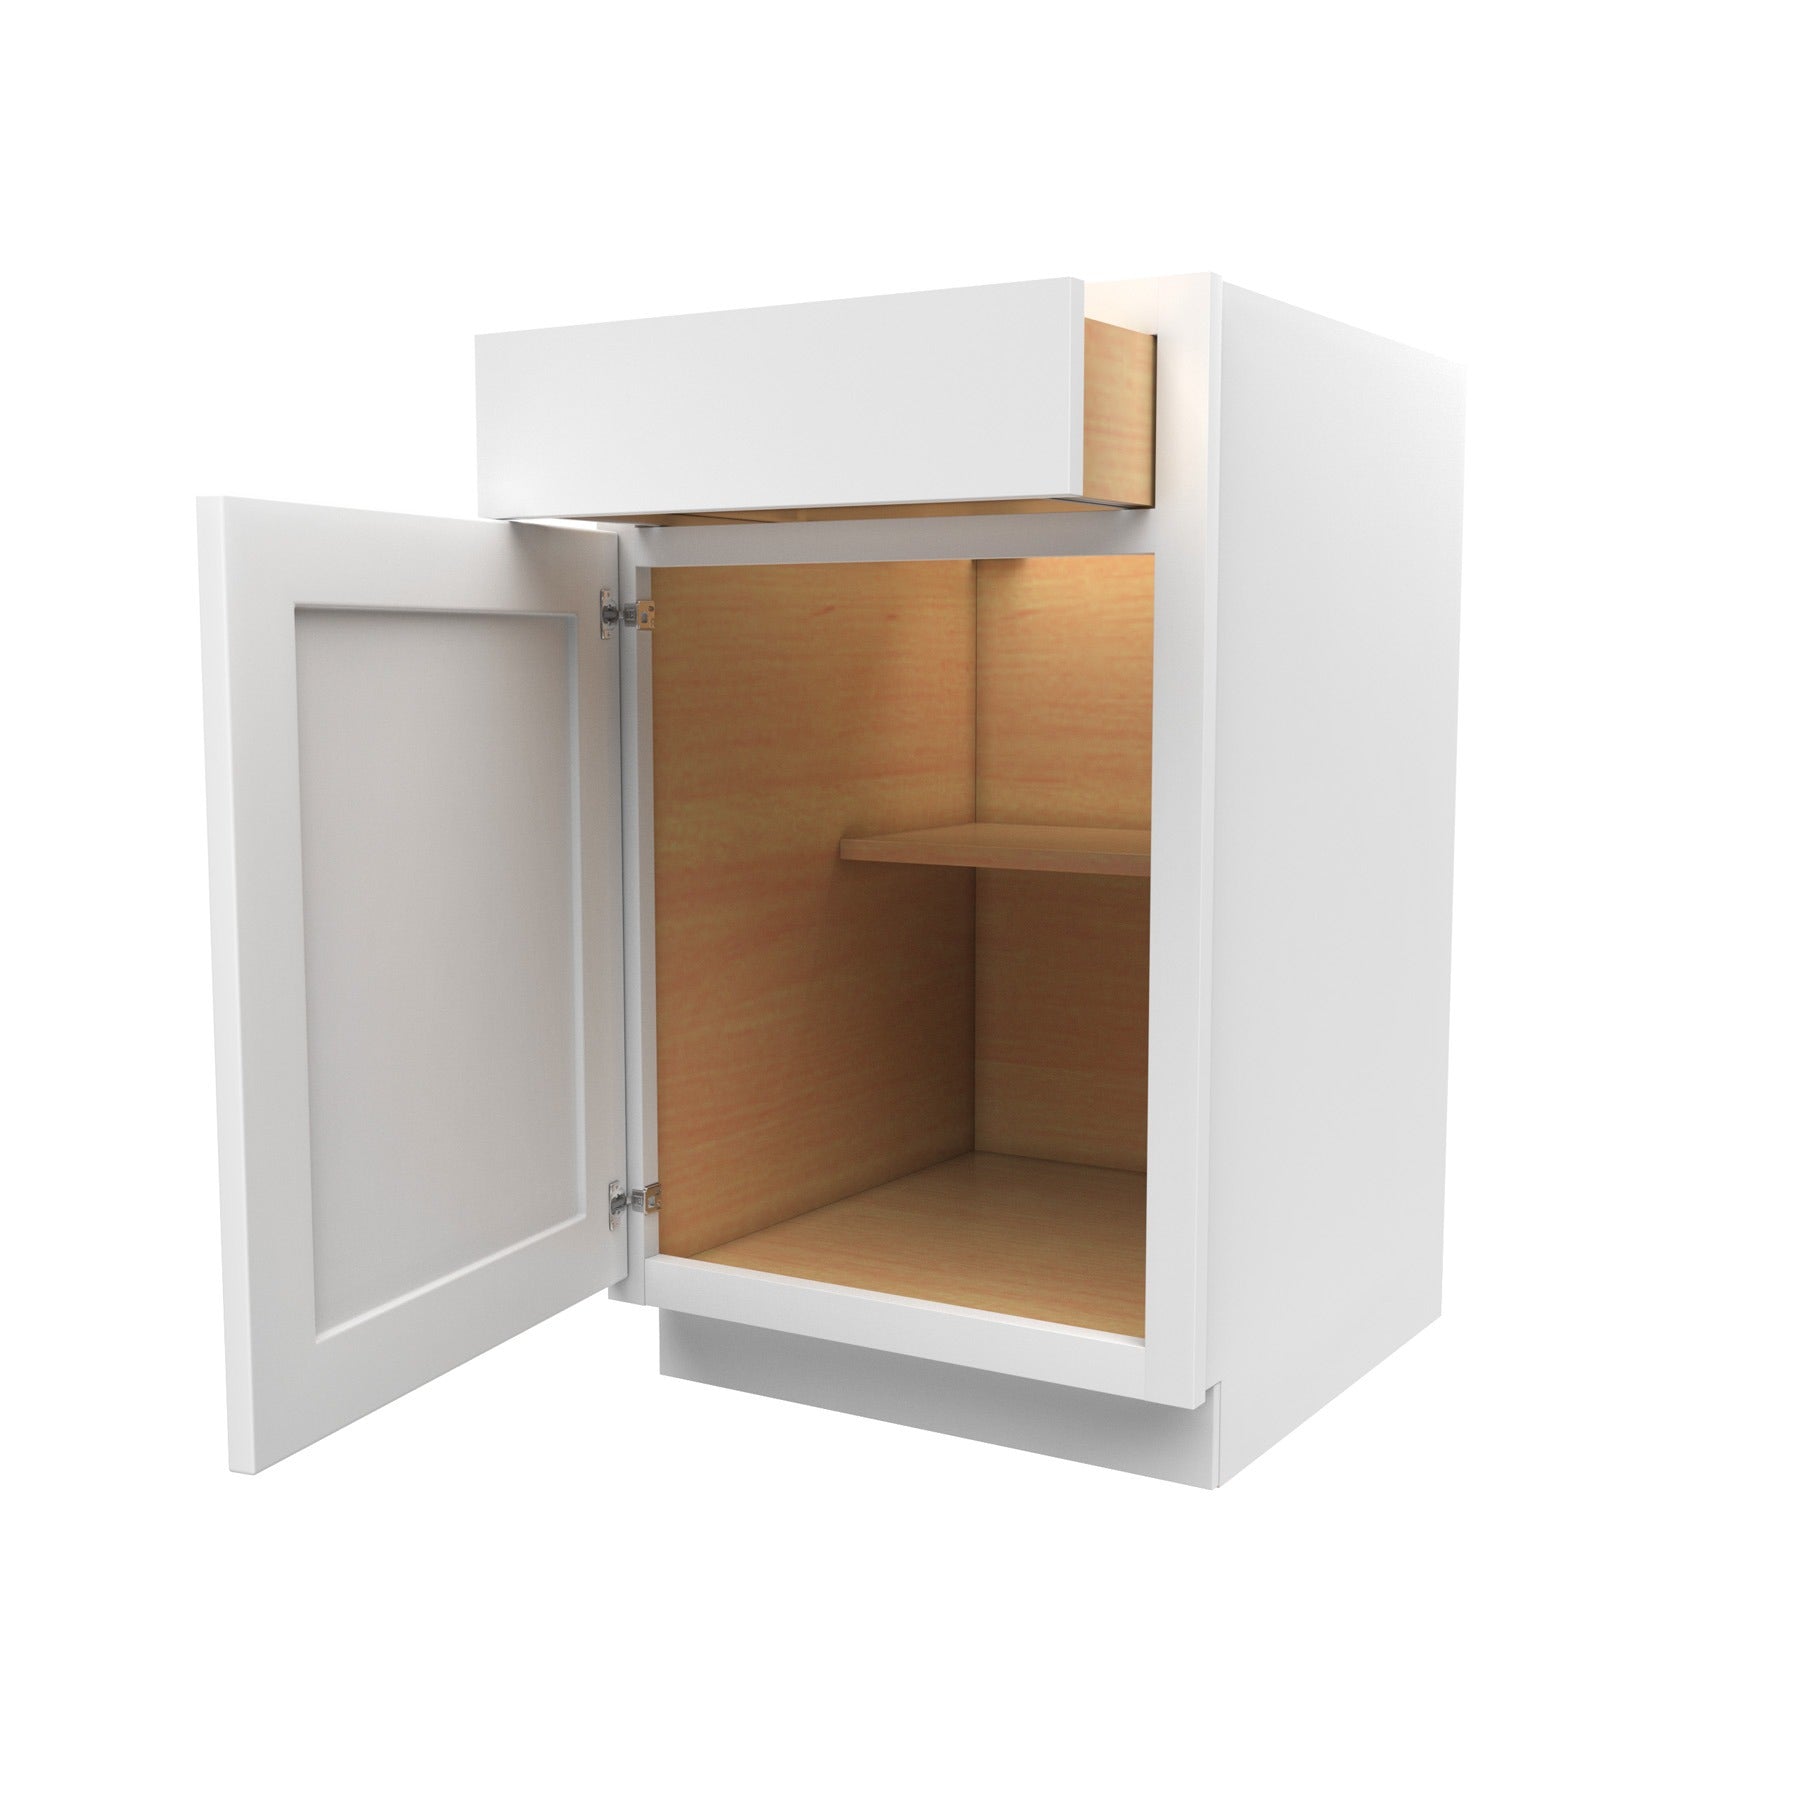 21 Inch Wide Single Door Base Cabinet - Luxor White Shaker - Ready To Assemble, 21"W x 34.5"H x 24"D